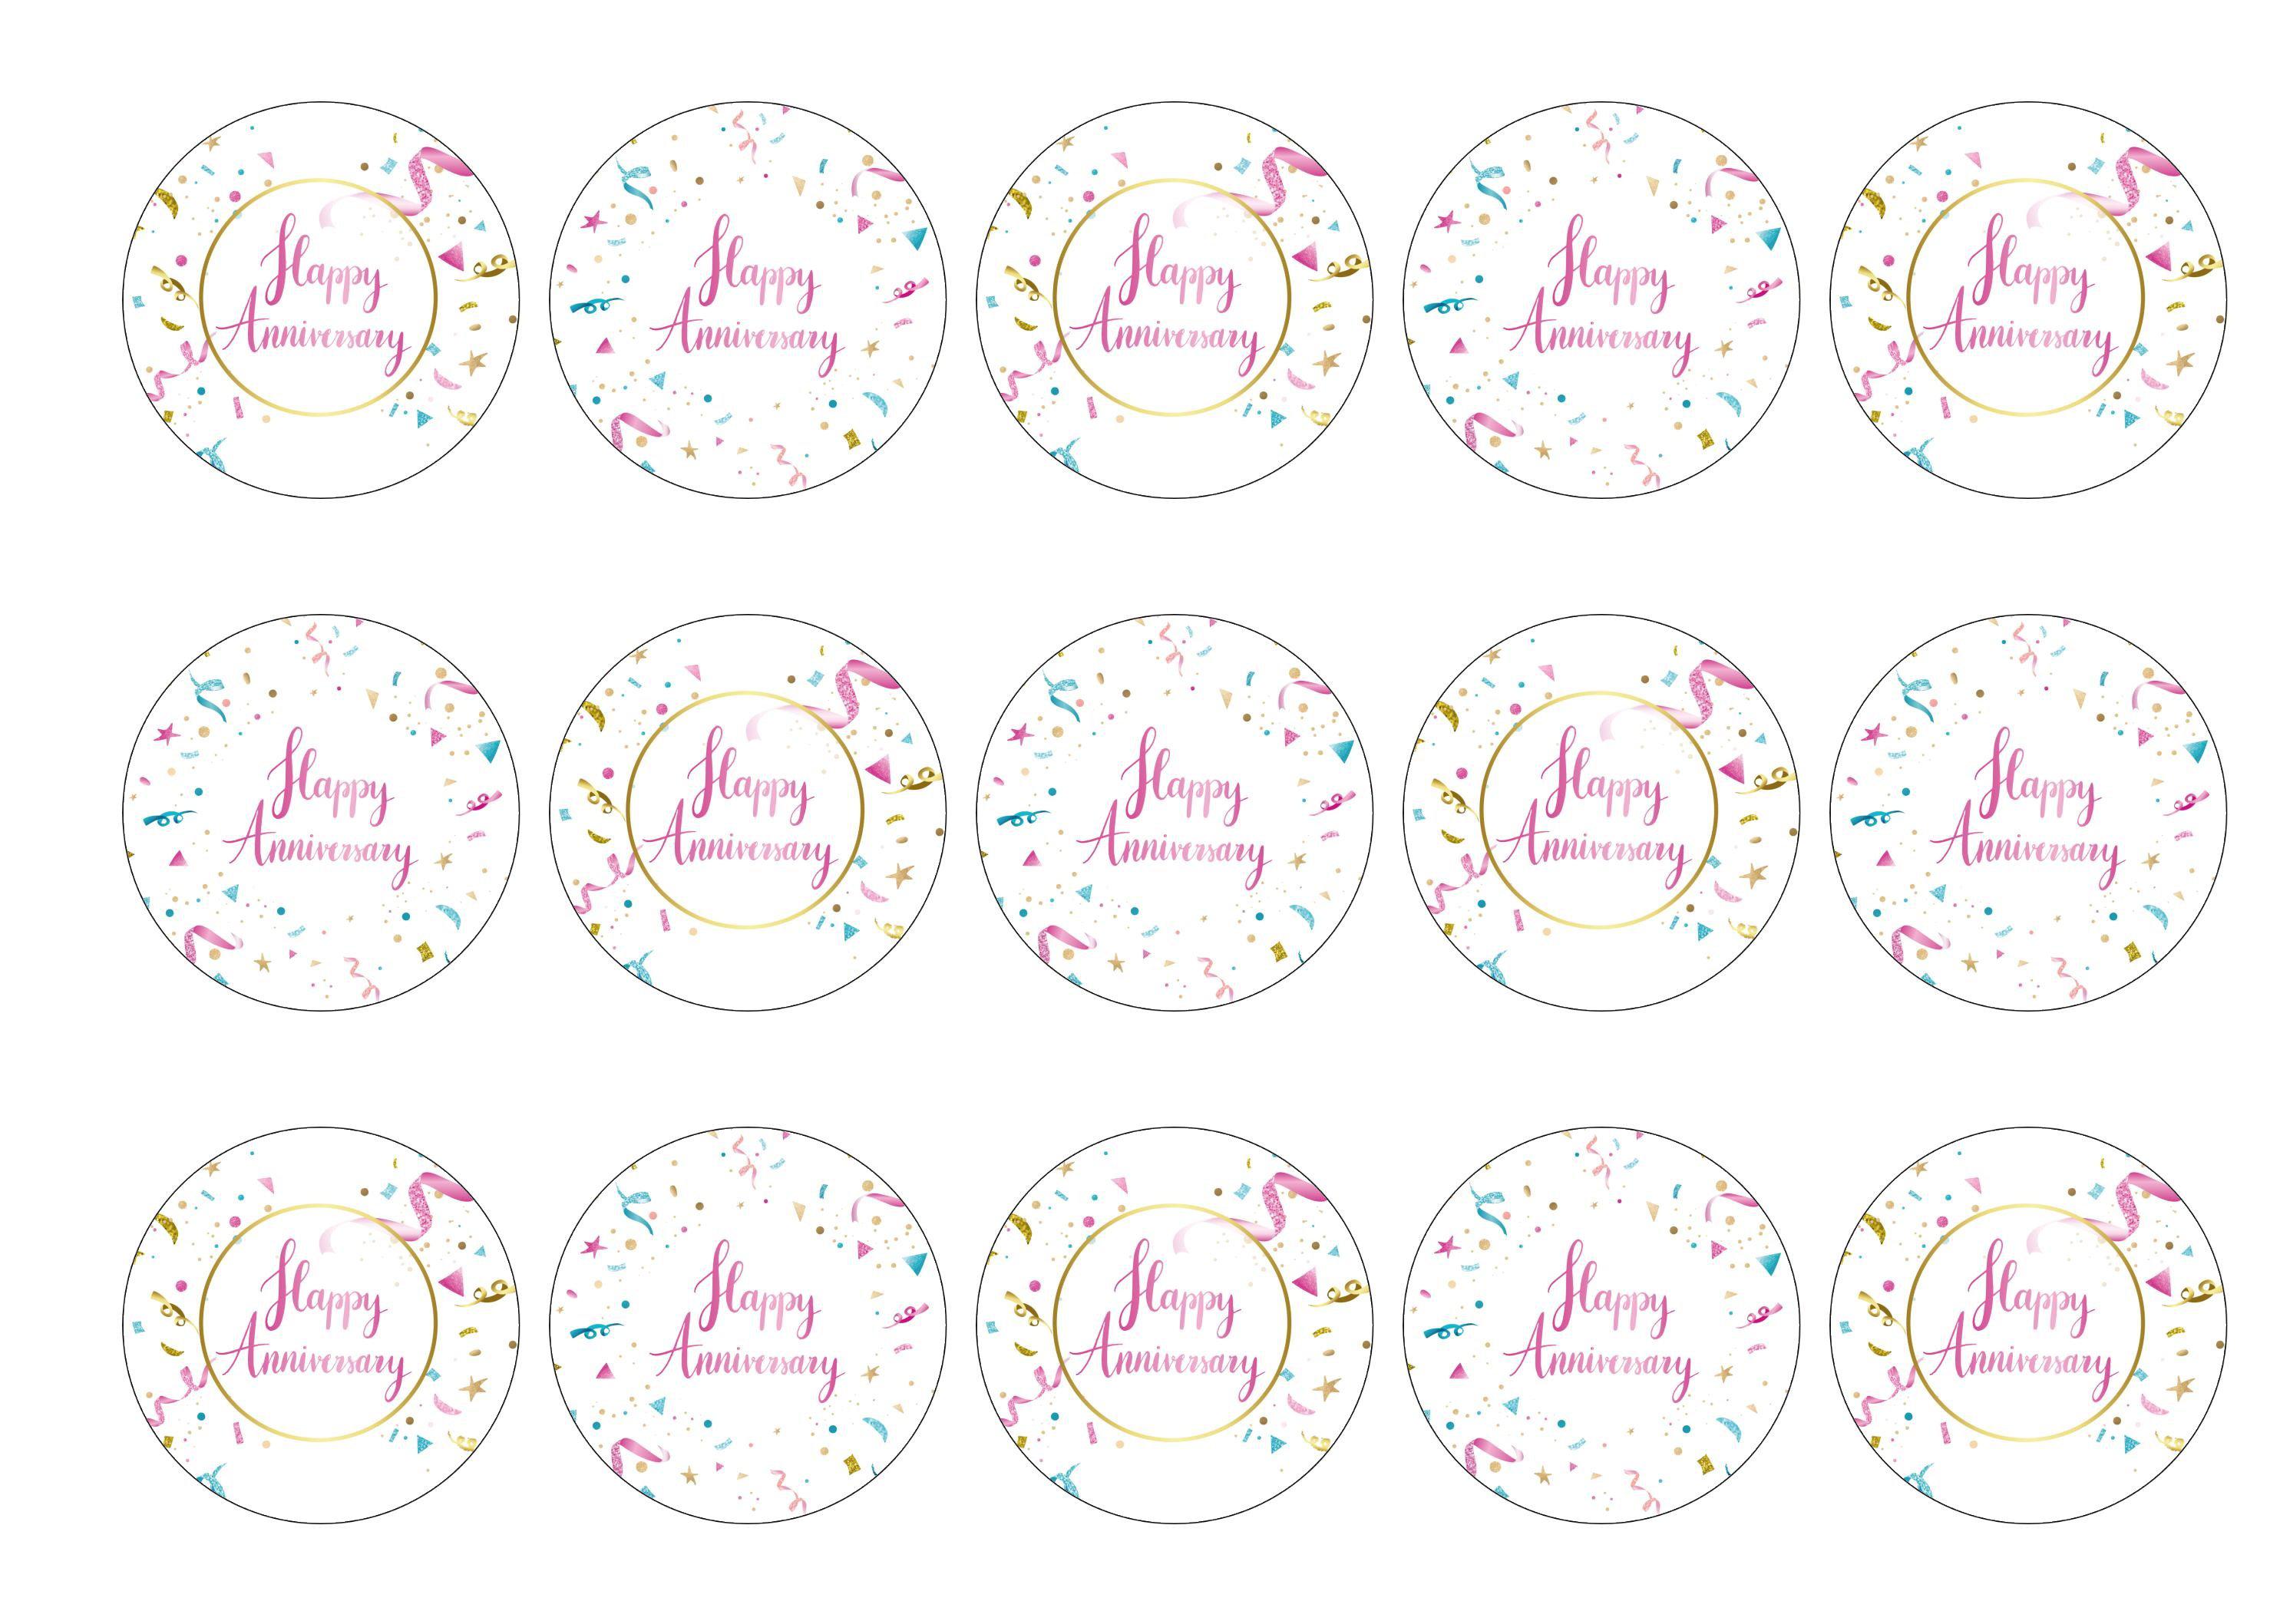 15 printed toppers suitable for an anniversary of any kind